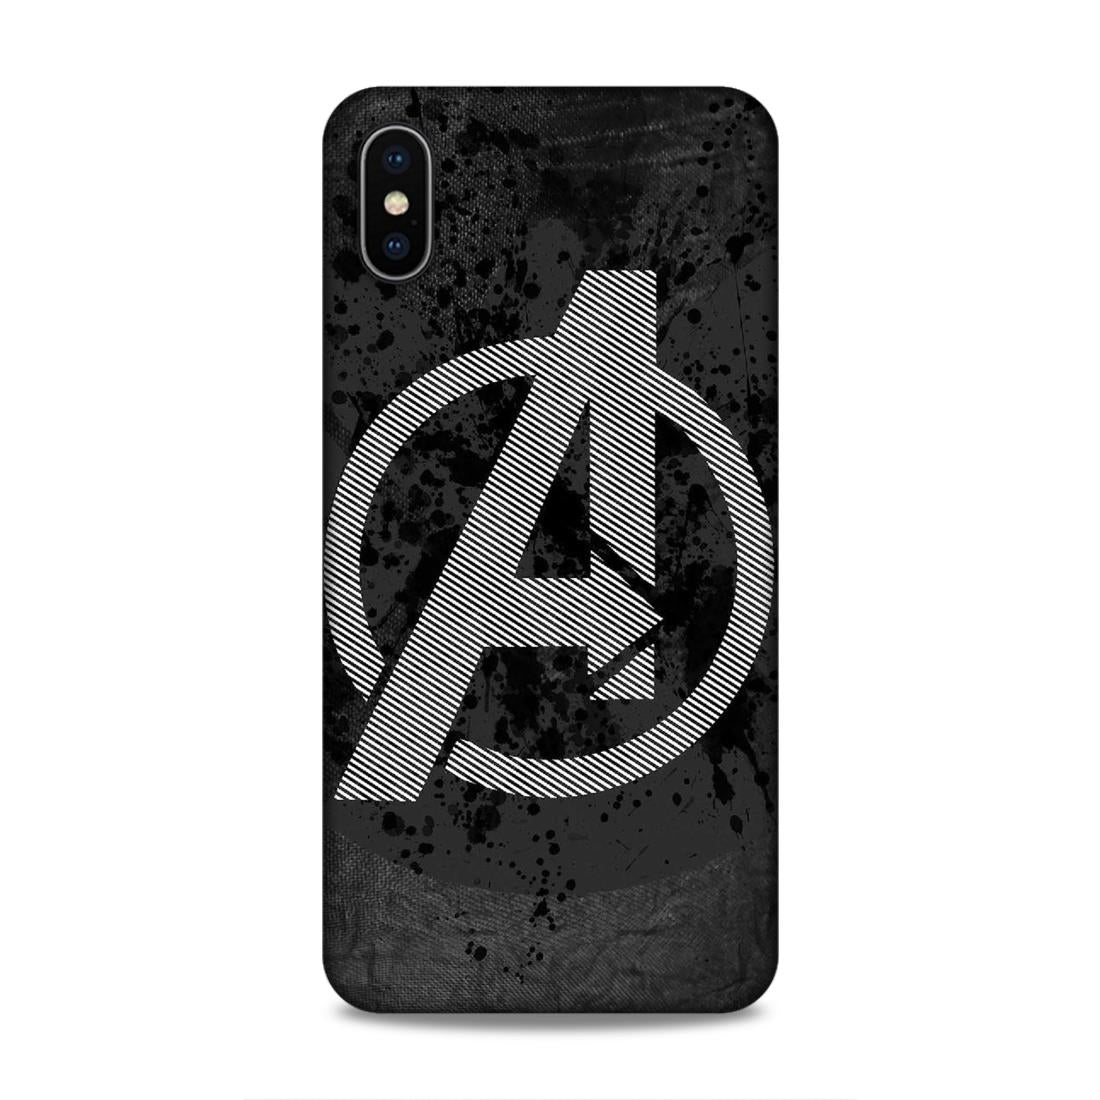 Avengers Symbol Hard Back Case For Apple iPhone XS Max